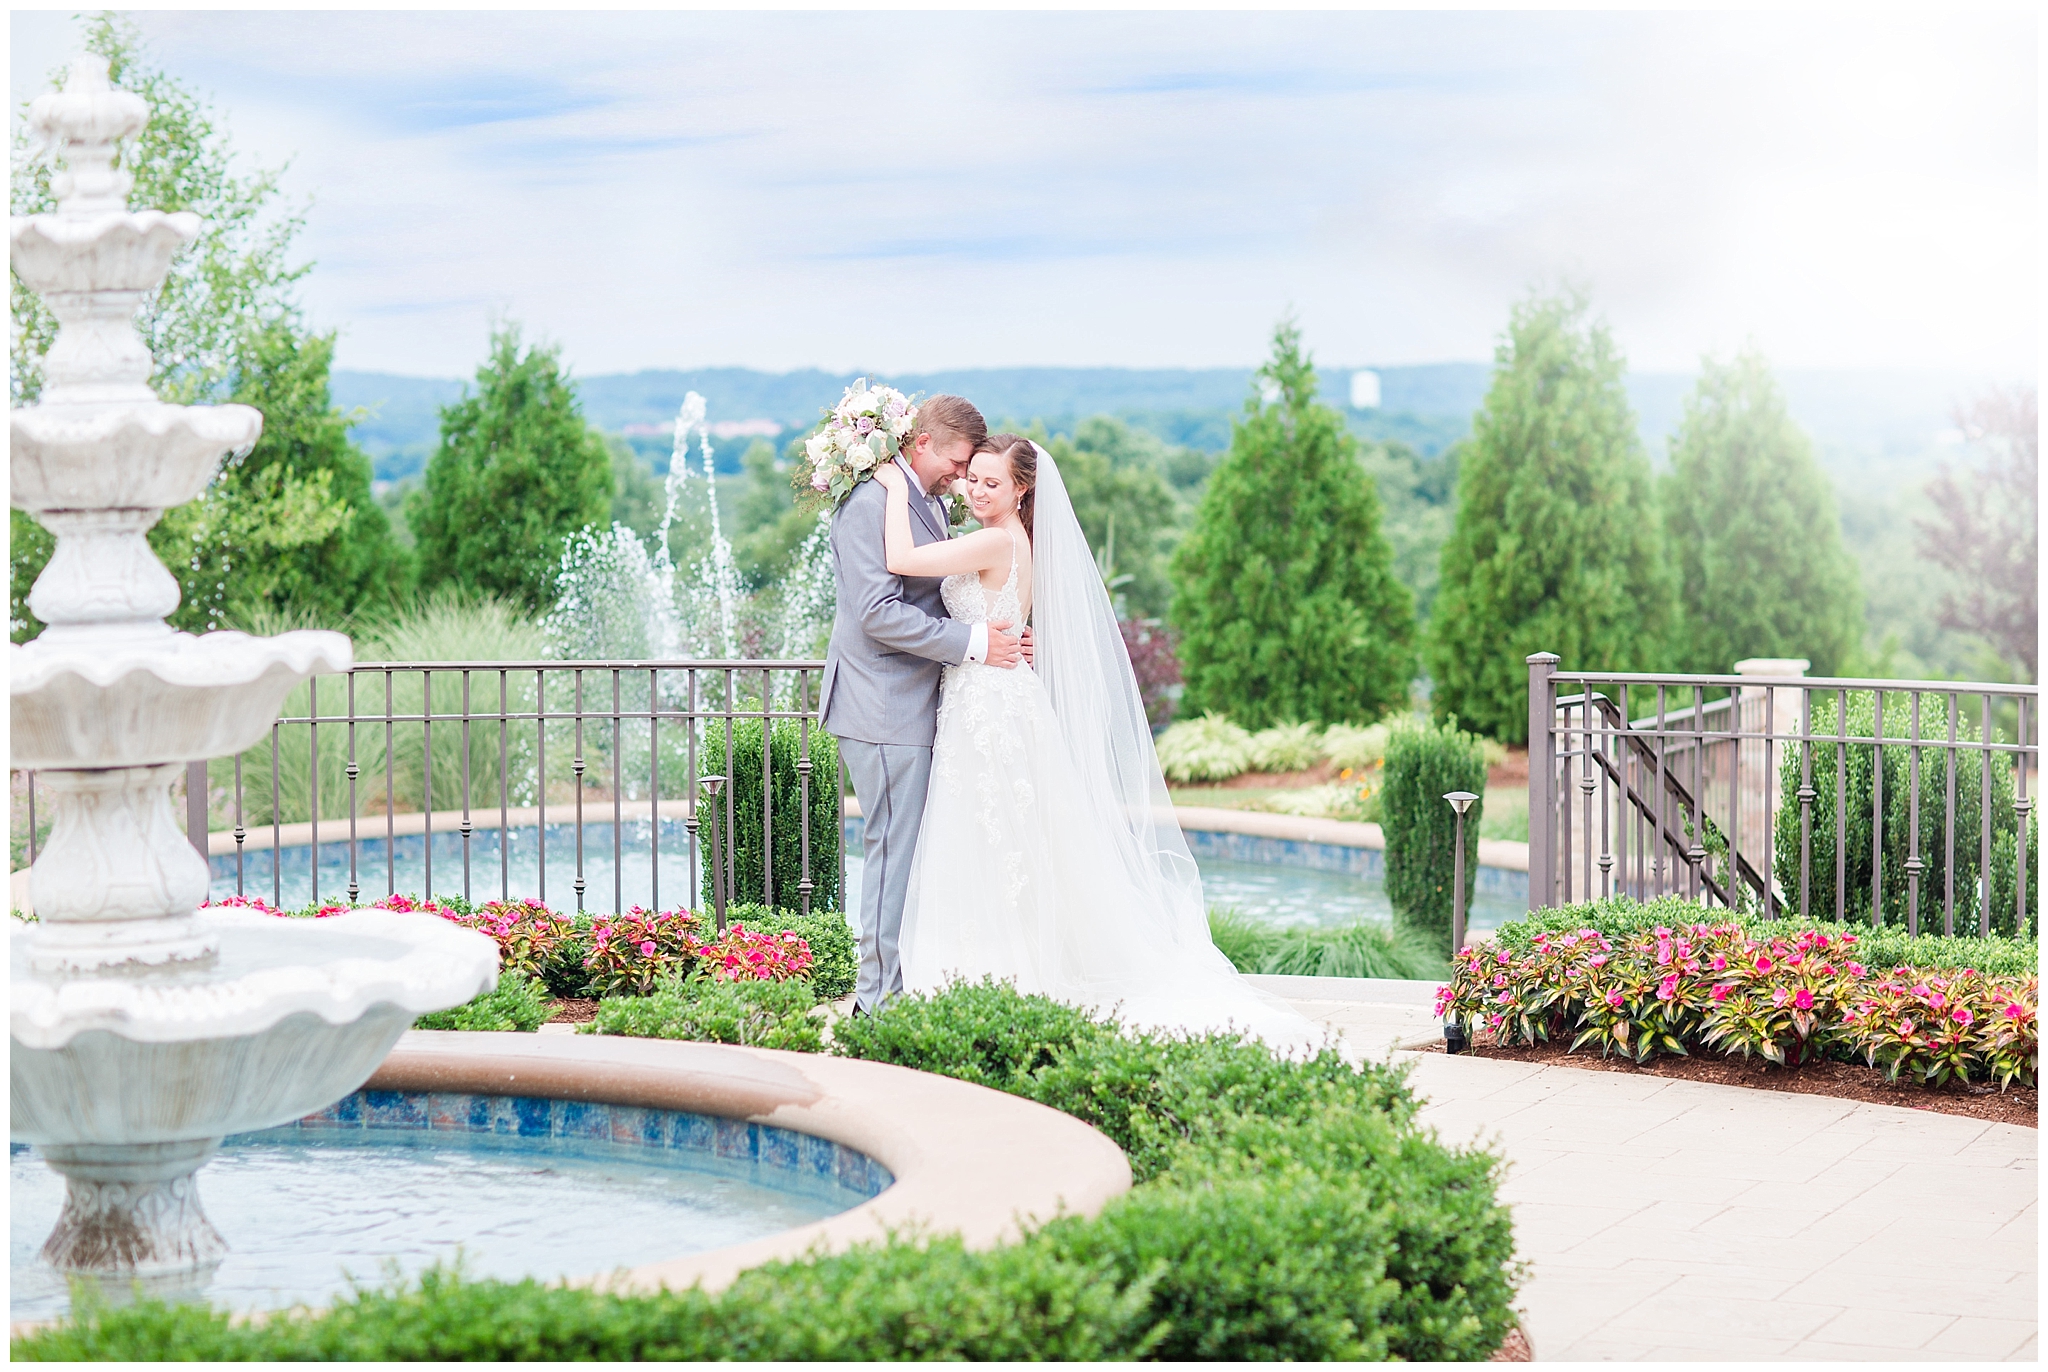 Aria Wedding and Banquet Facility in Prospect Connecticut 